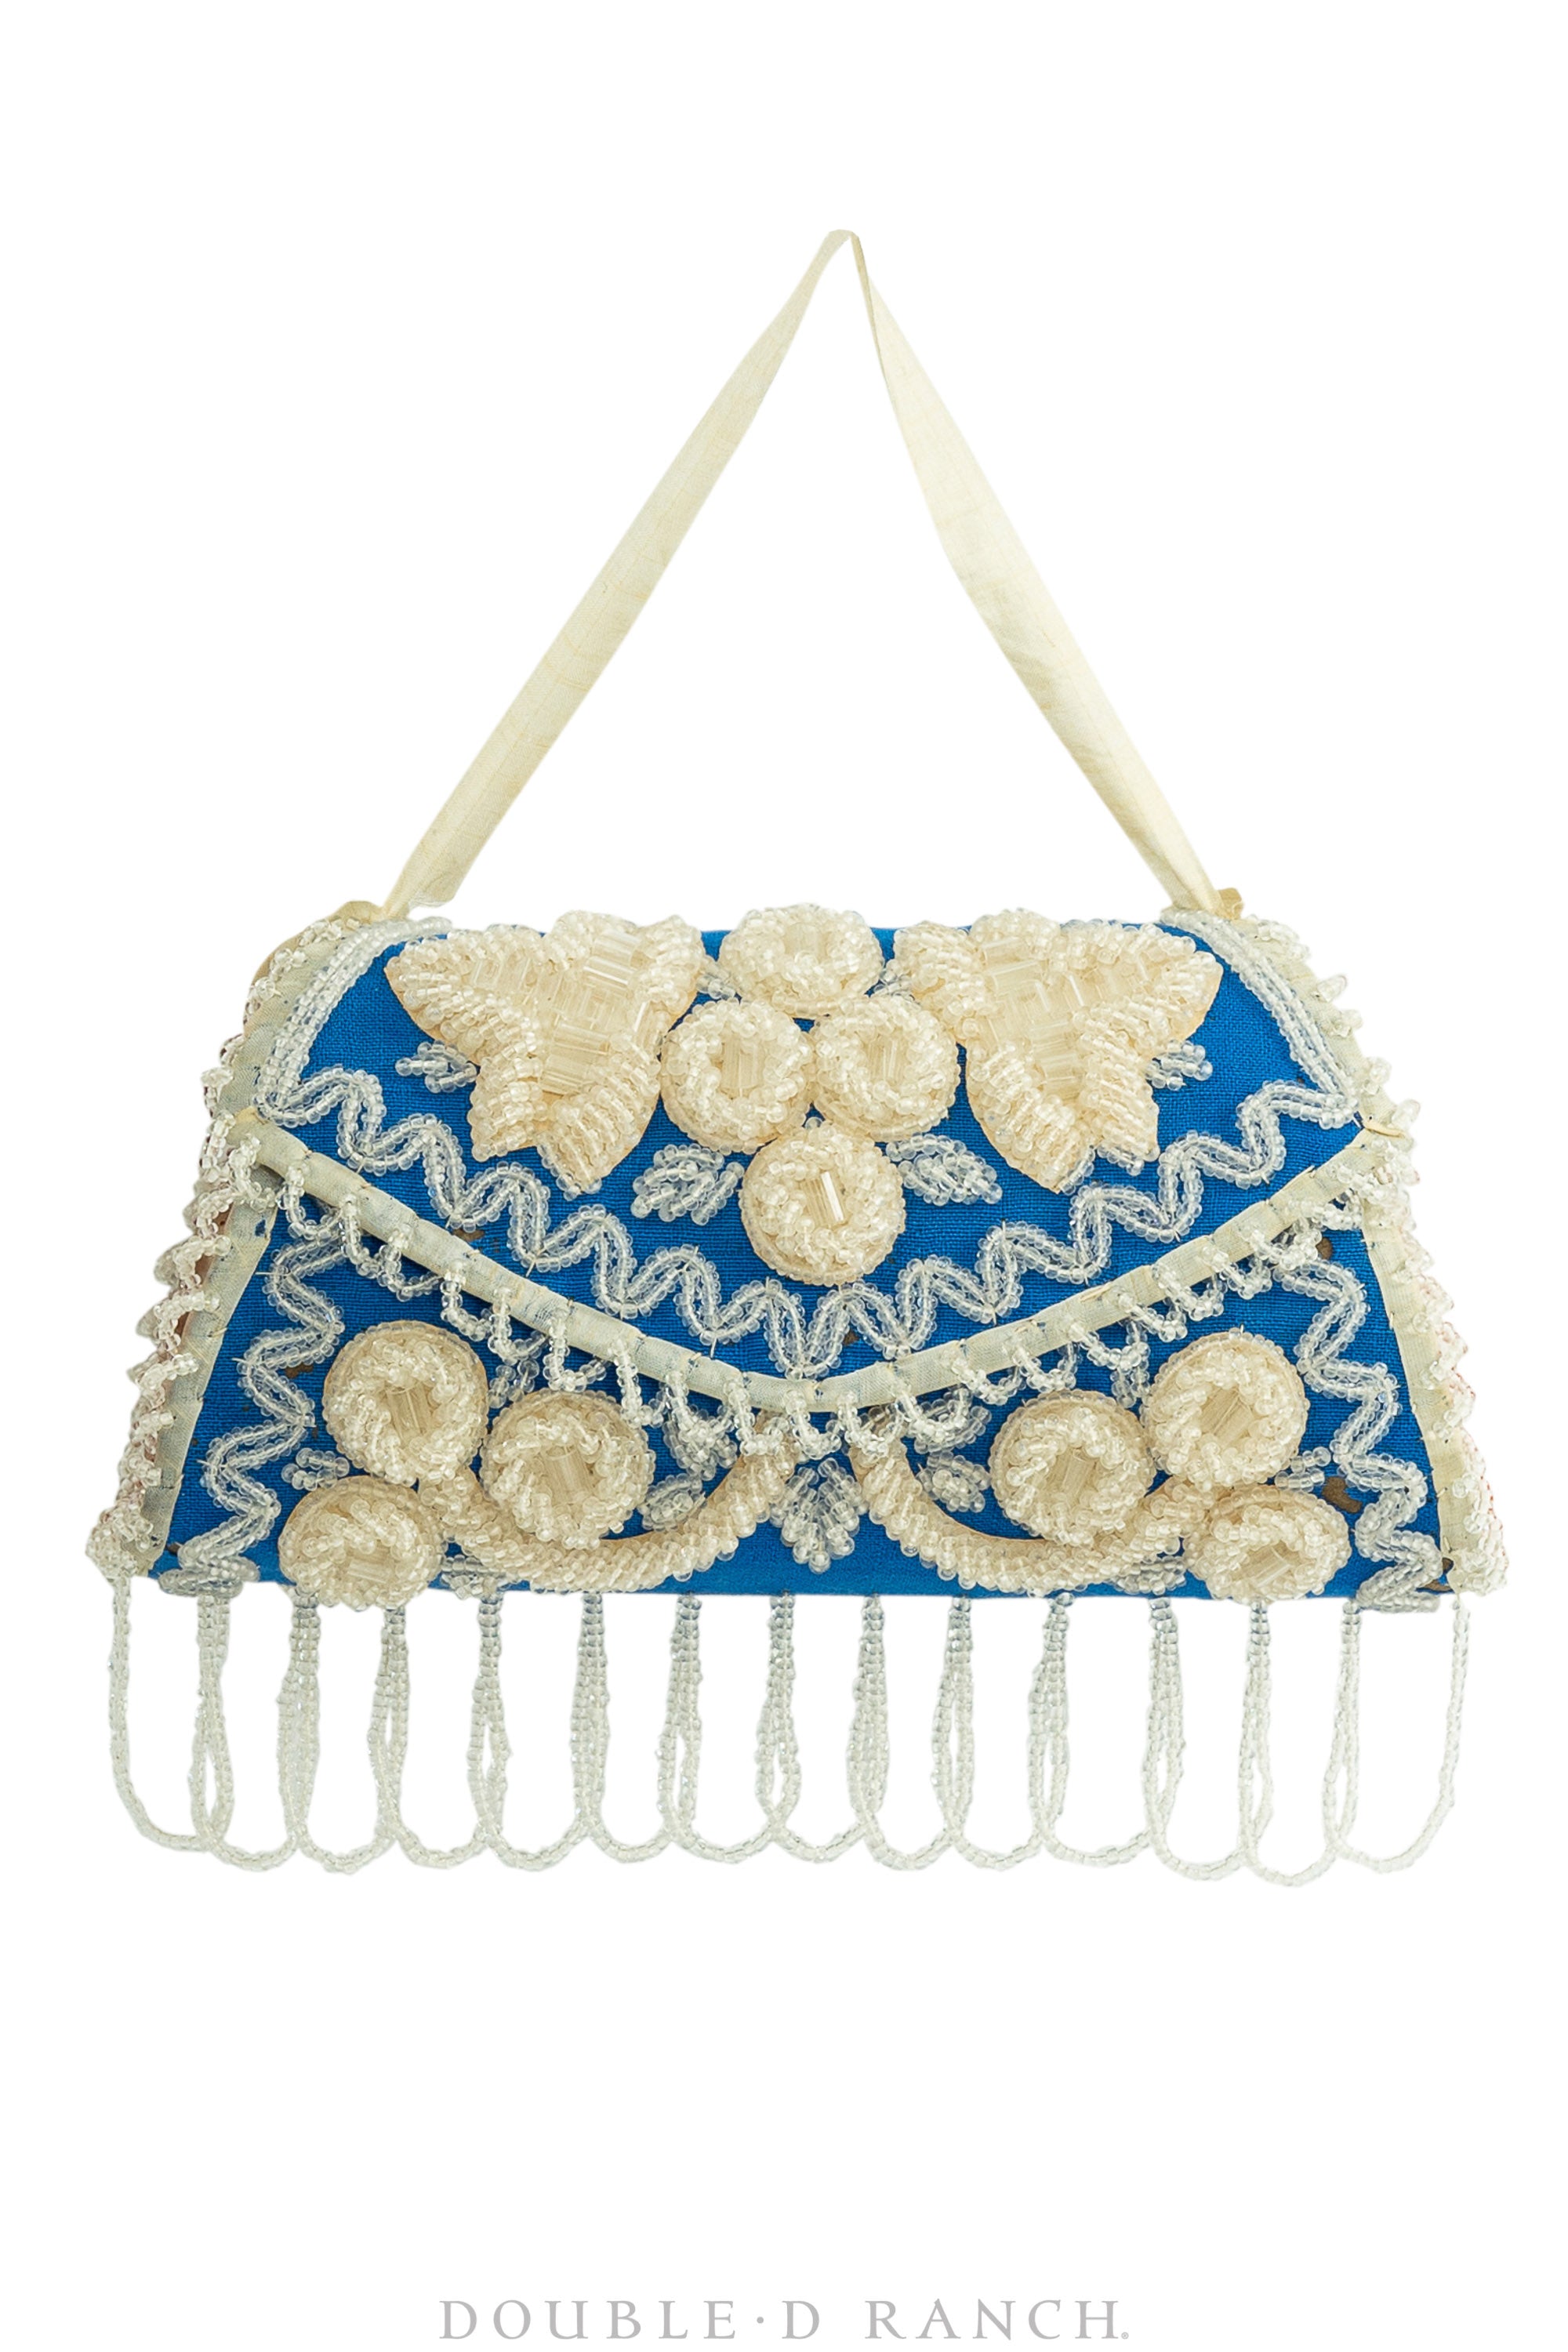 Whimsey, Purse, Heavy Beading, Vintage, Late 19th Century, 293